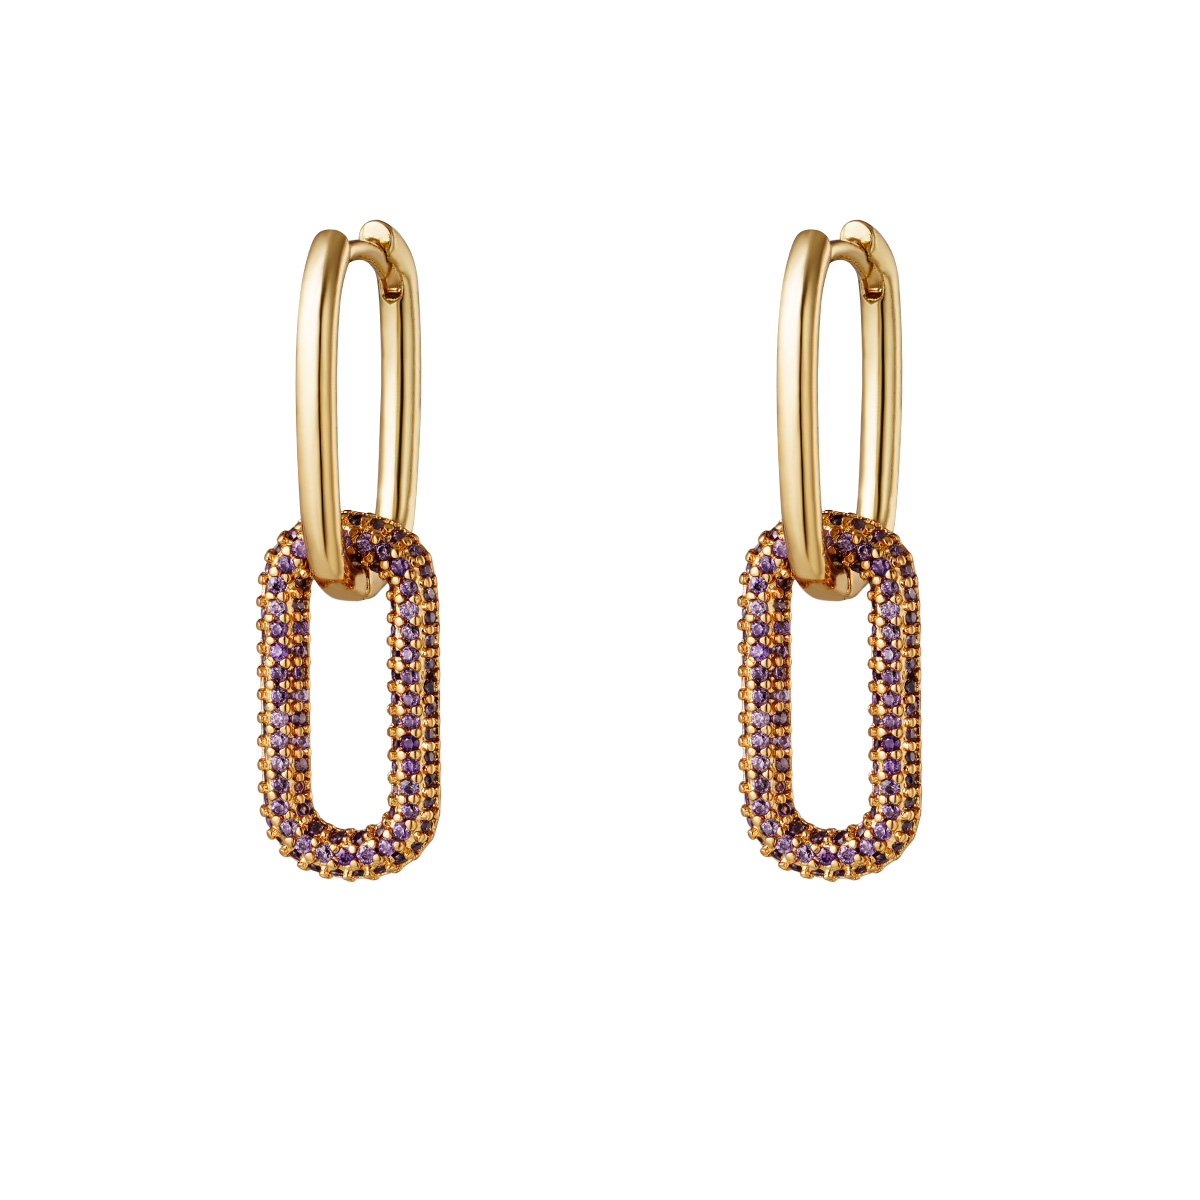 Copper linked earrings with zircon stones - Small